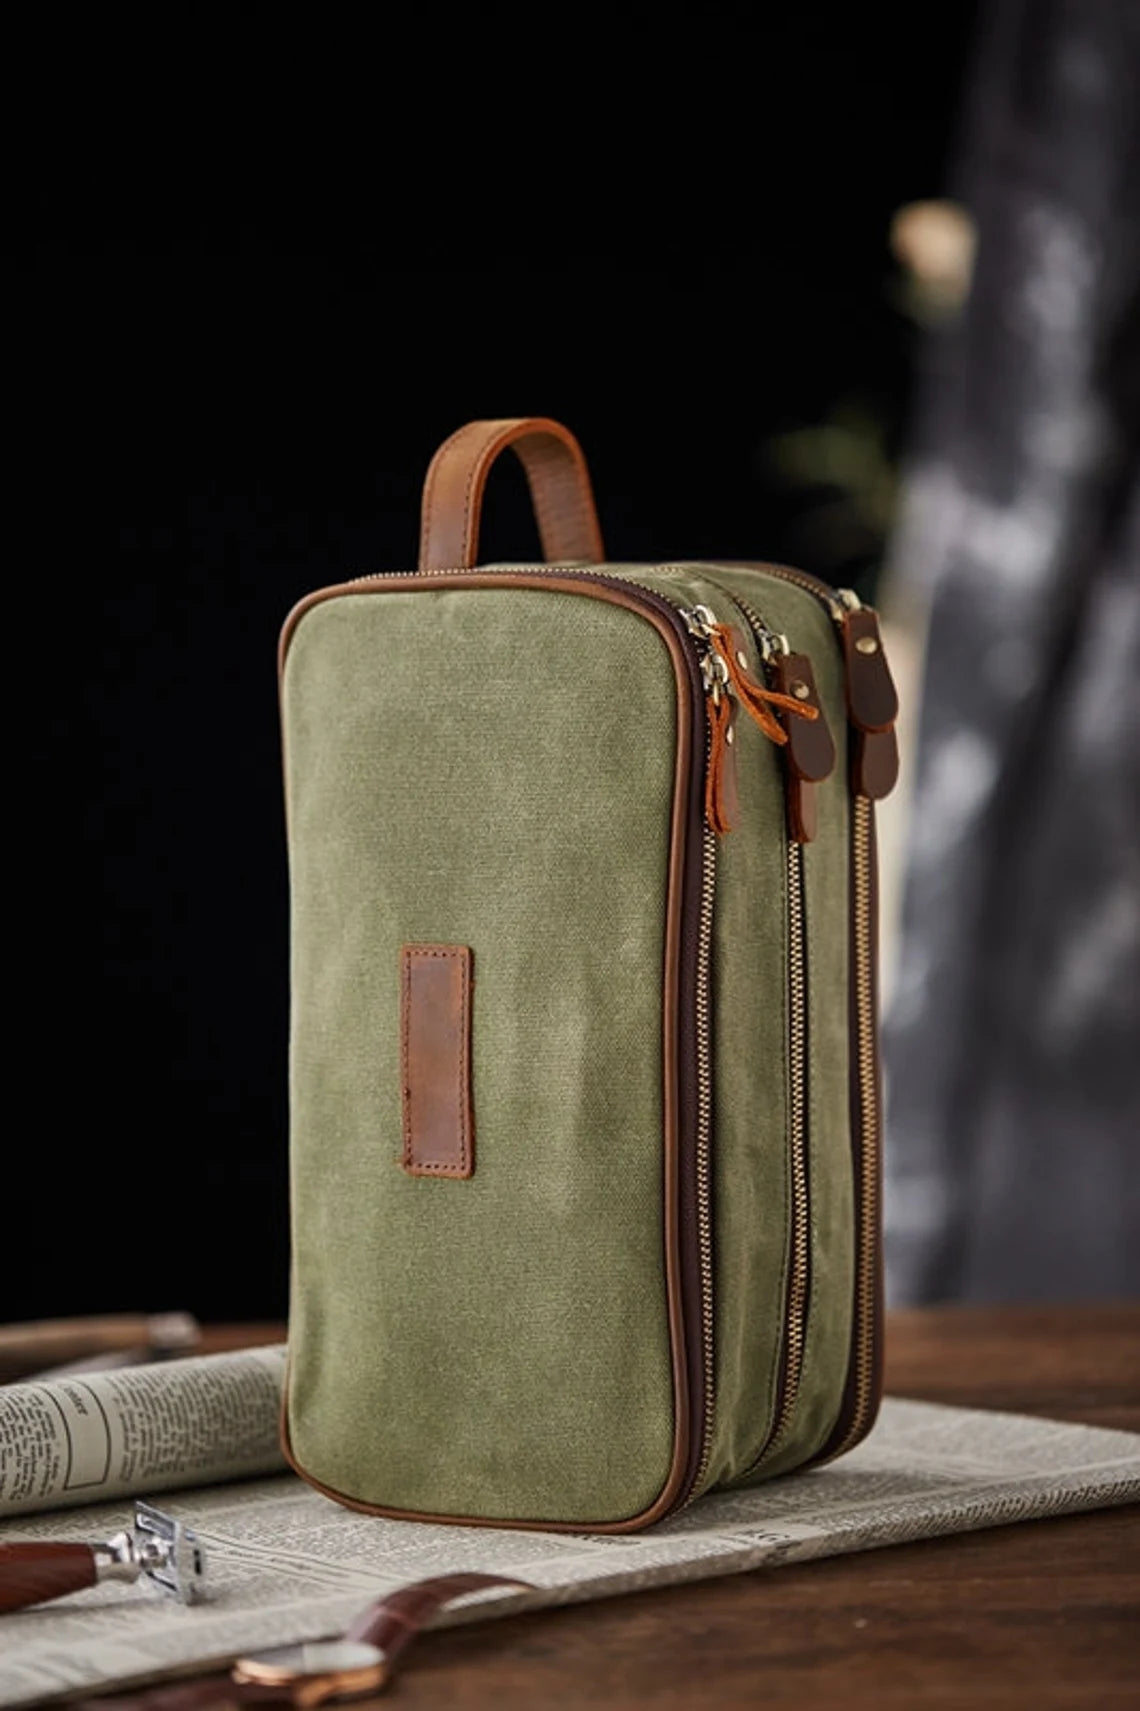 Mens Small Toiletry Bag: Waxed Canvas Personalized Dopp Kit